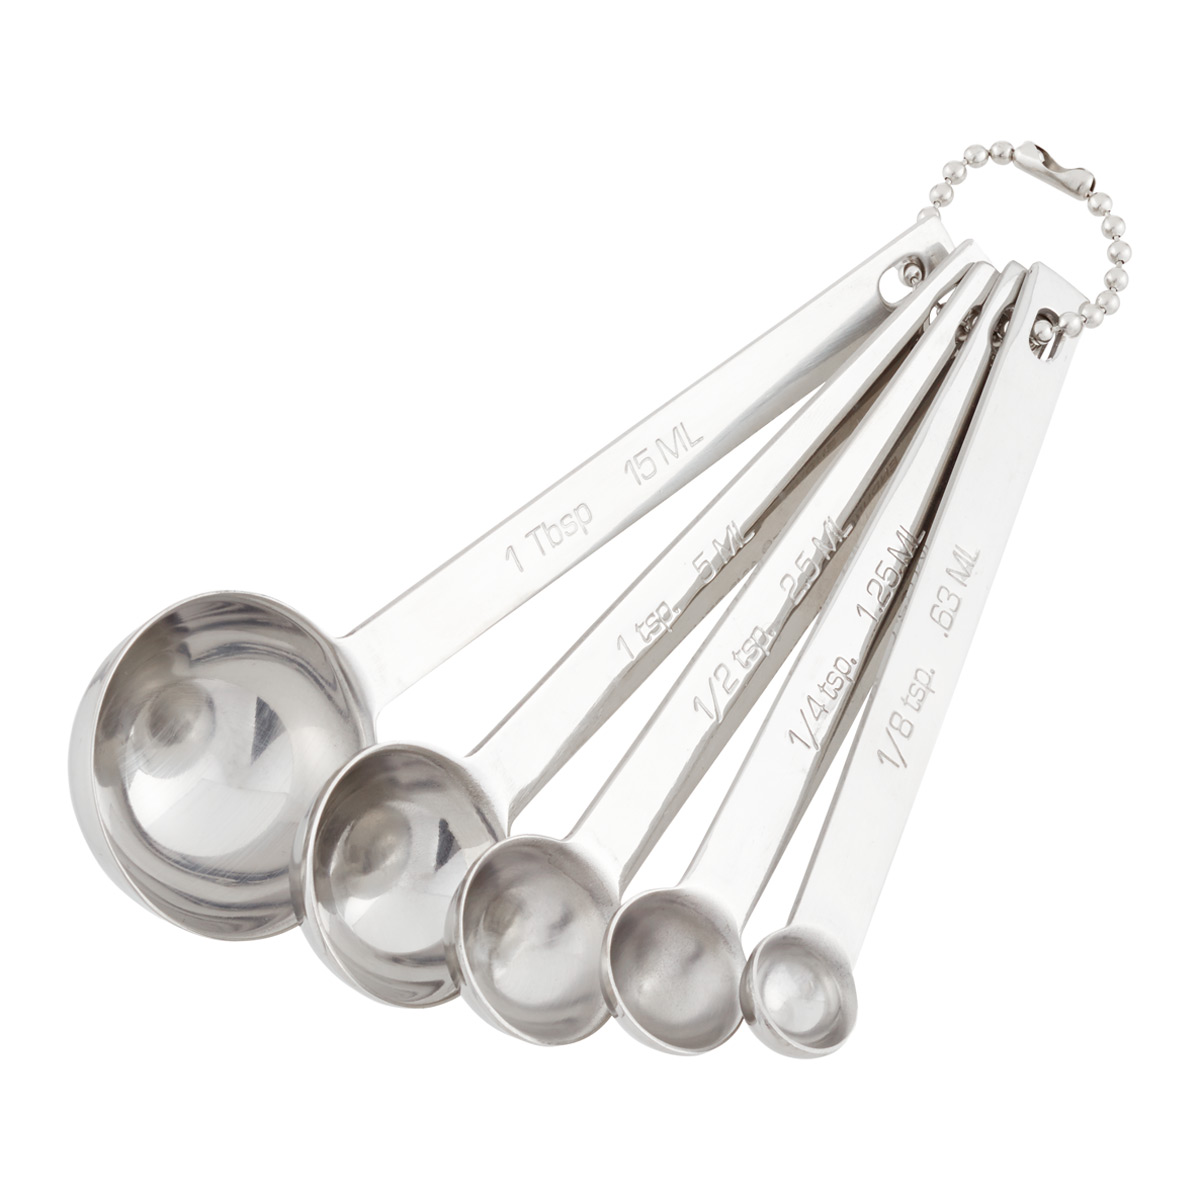 https://www.containerstore.com/catalogimages/305095/667030-endurance-measuring-spoons-st.jpg